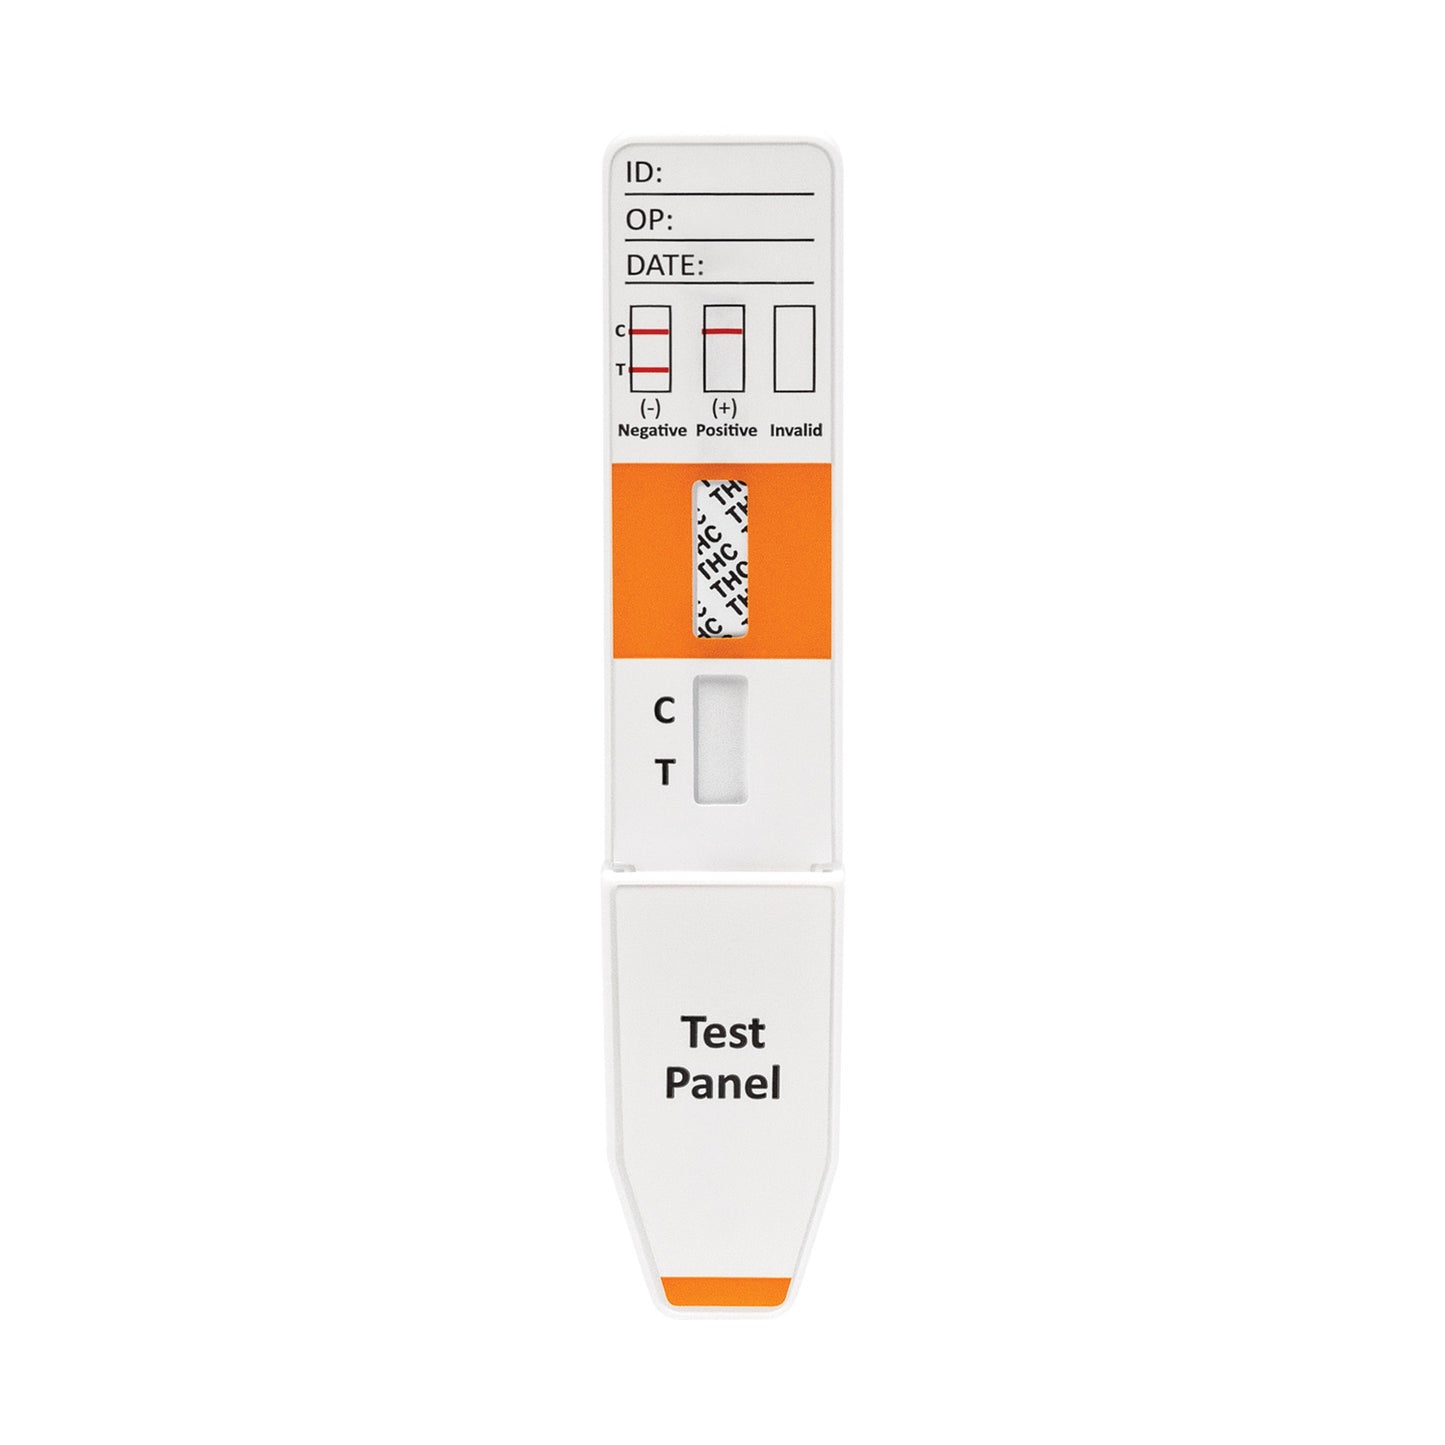 Surestep™ Powder Test Drug Screen Panel (Bzo) (Image Differs To Product)